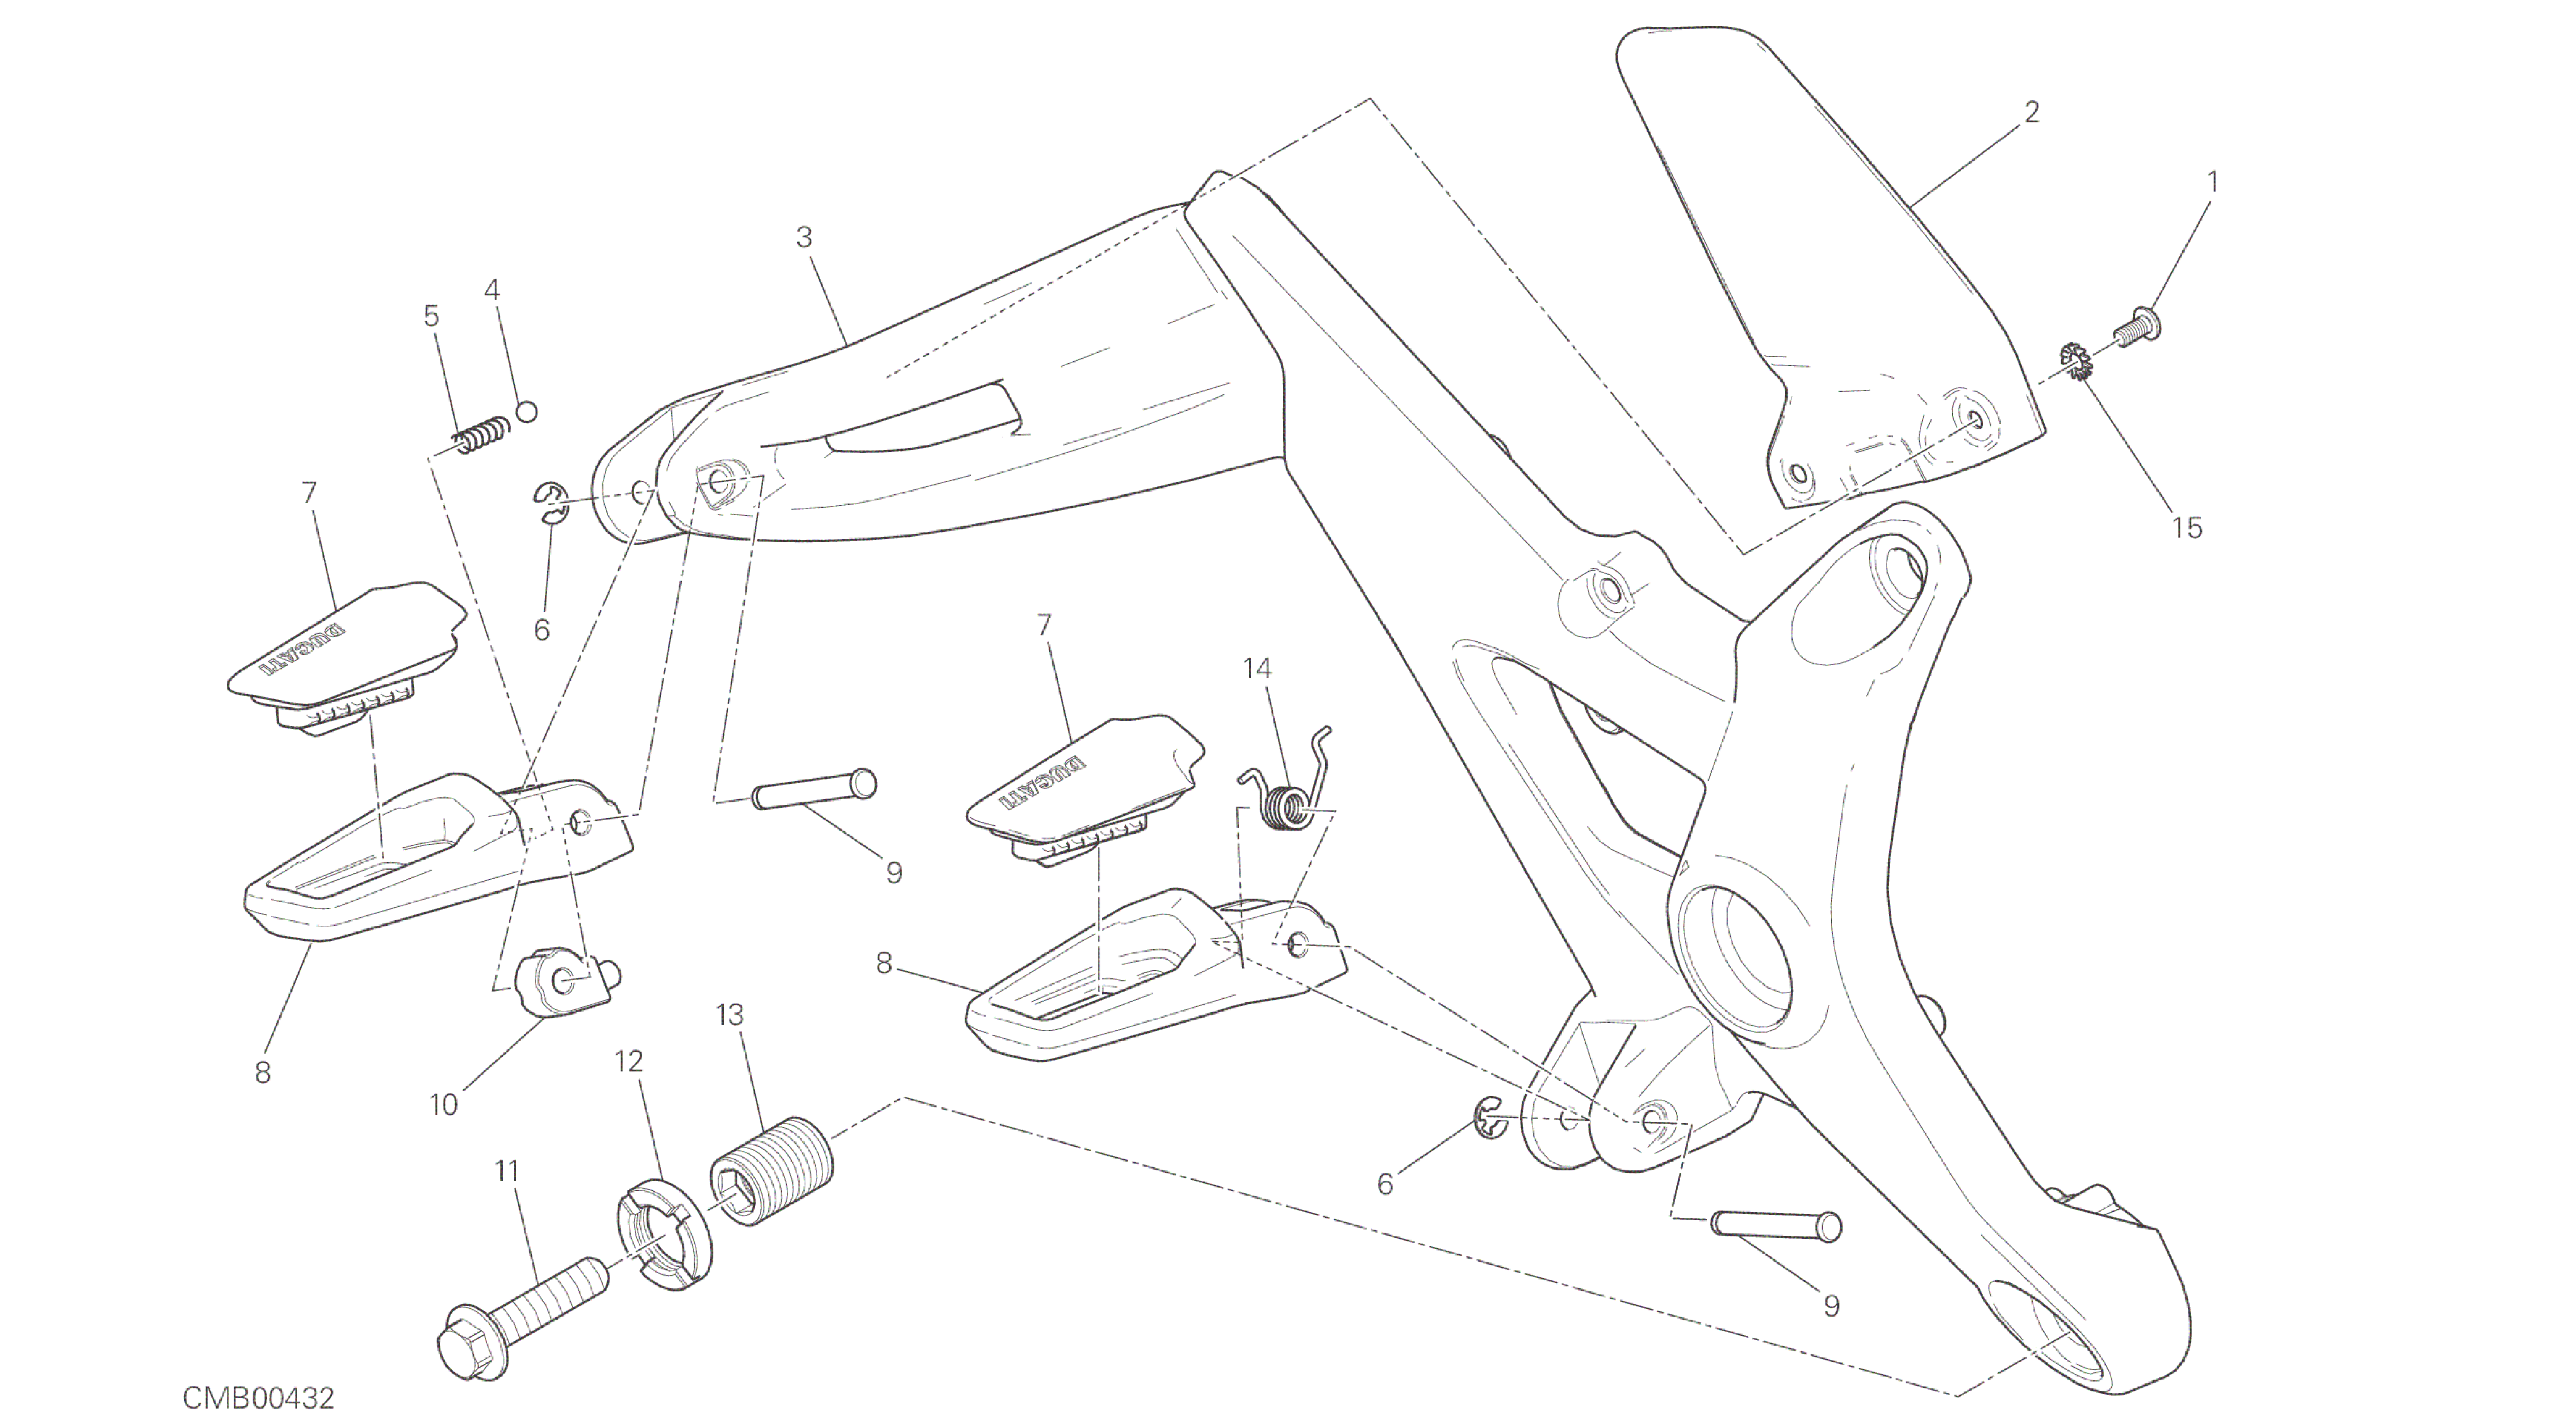 DRAWING 27B - FOOTRESTS, RIGHT [MOD:M 821]GROUP FRAME